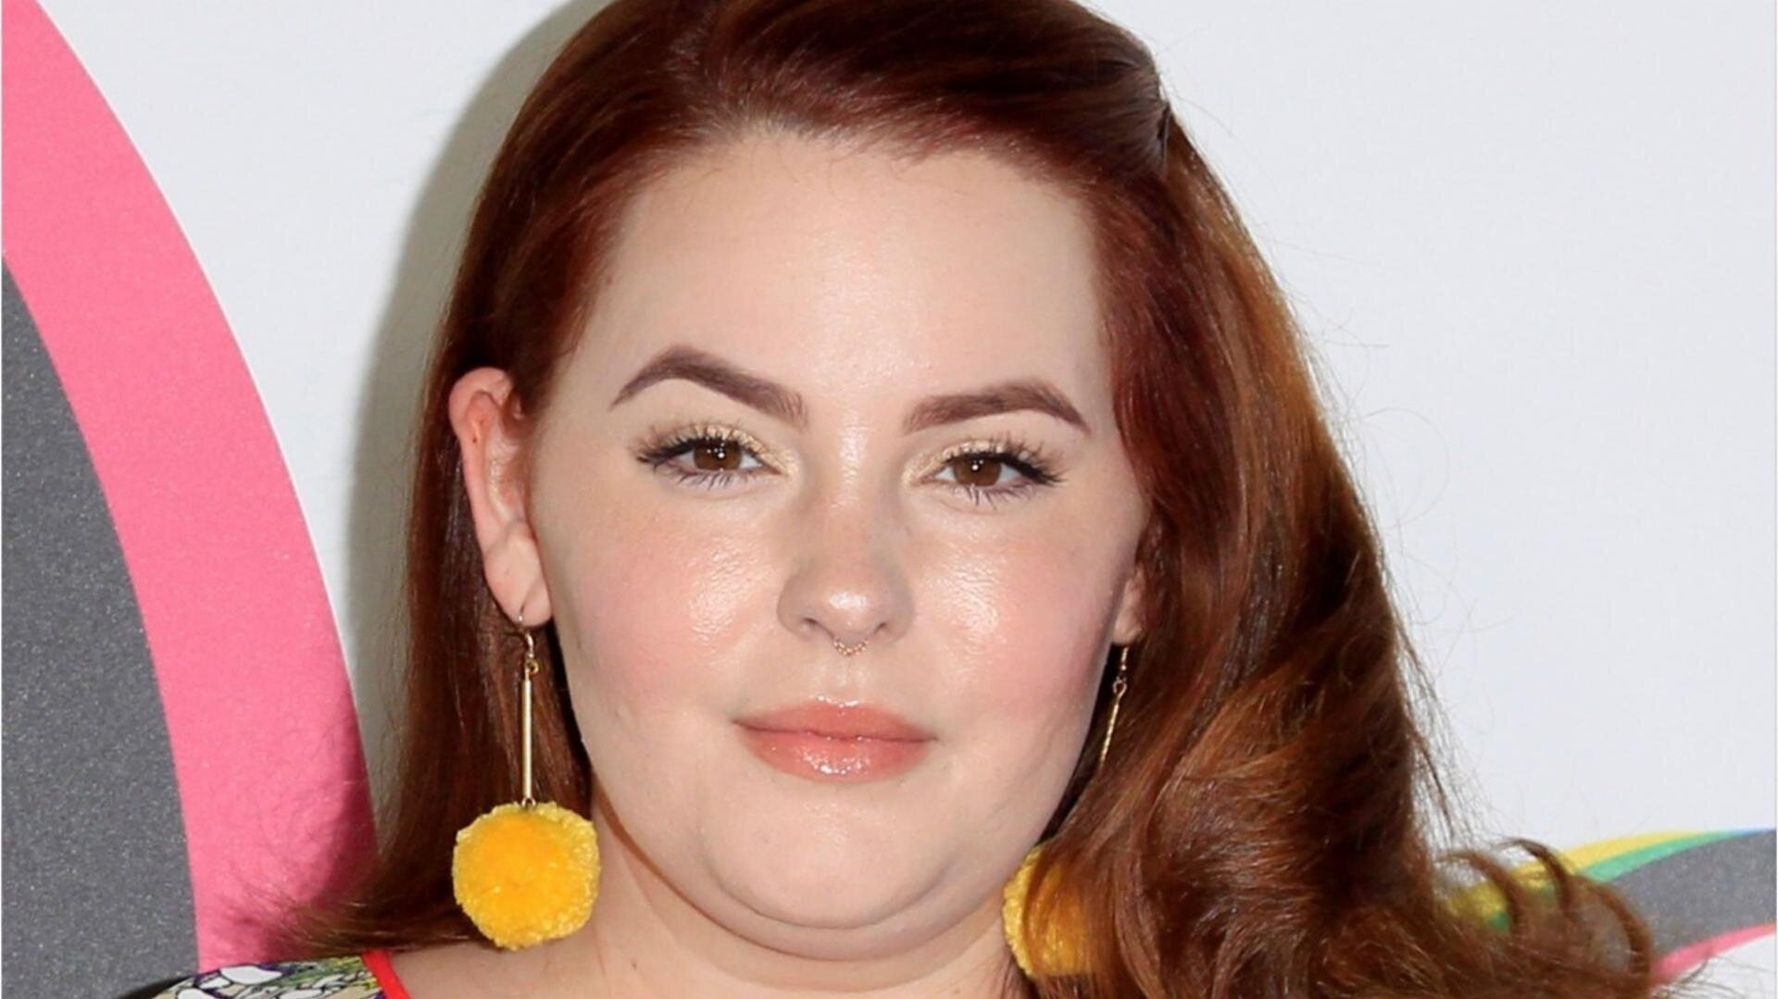 Tess Holliday blasts App for 'stealing' pictures and airbrushing